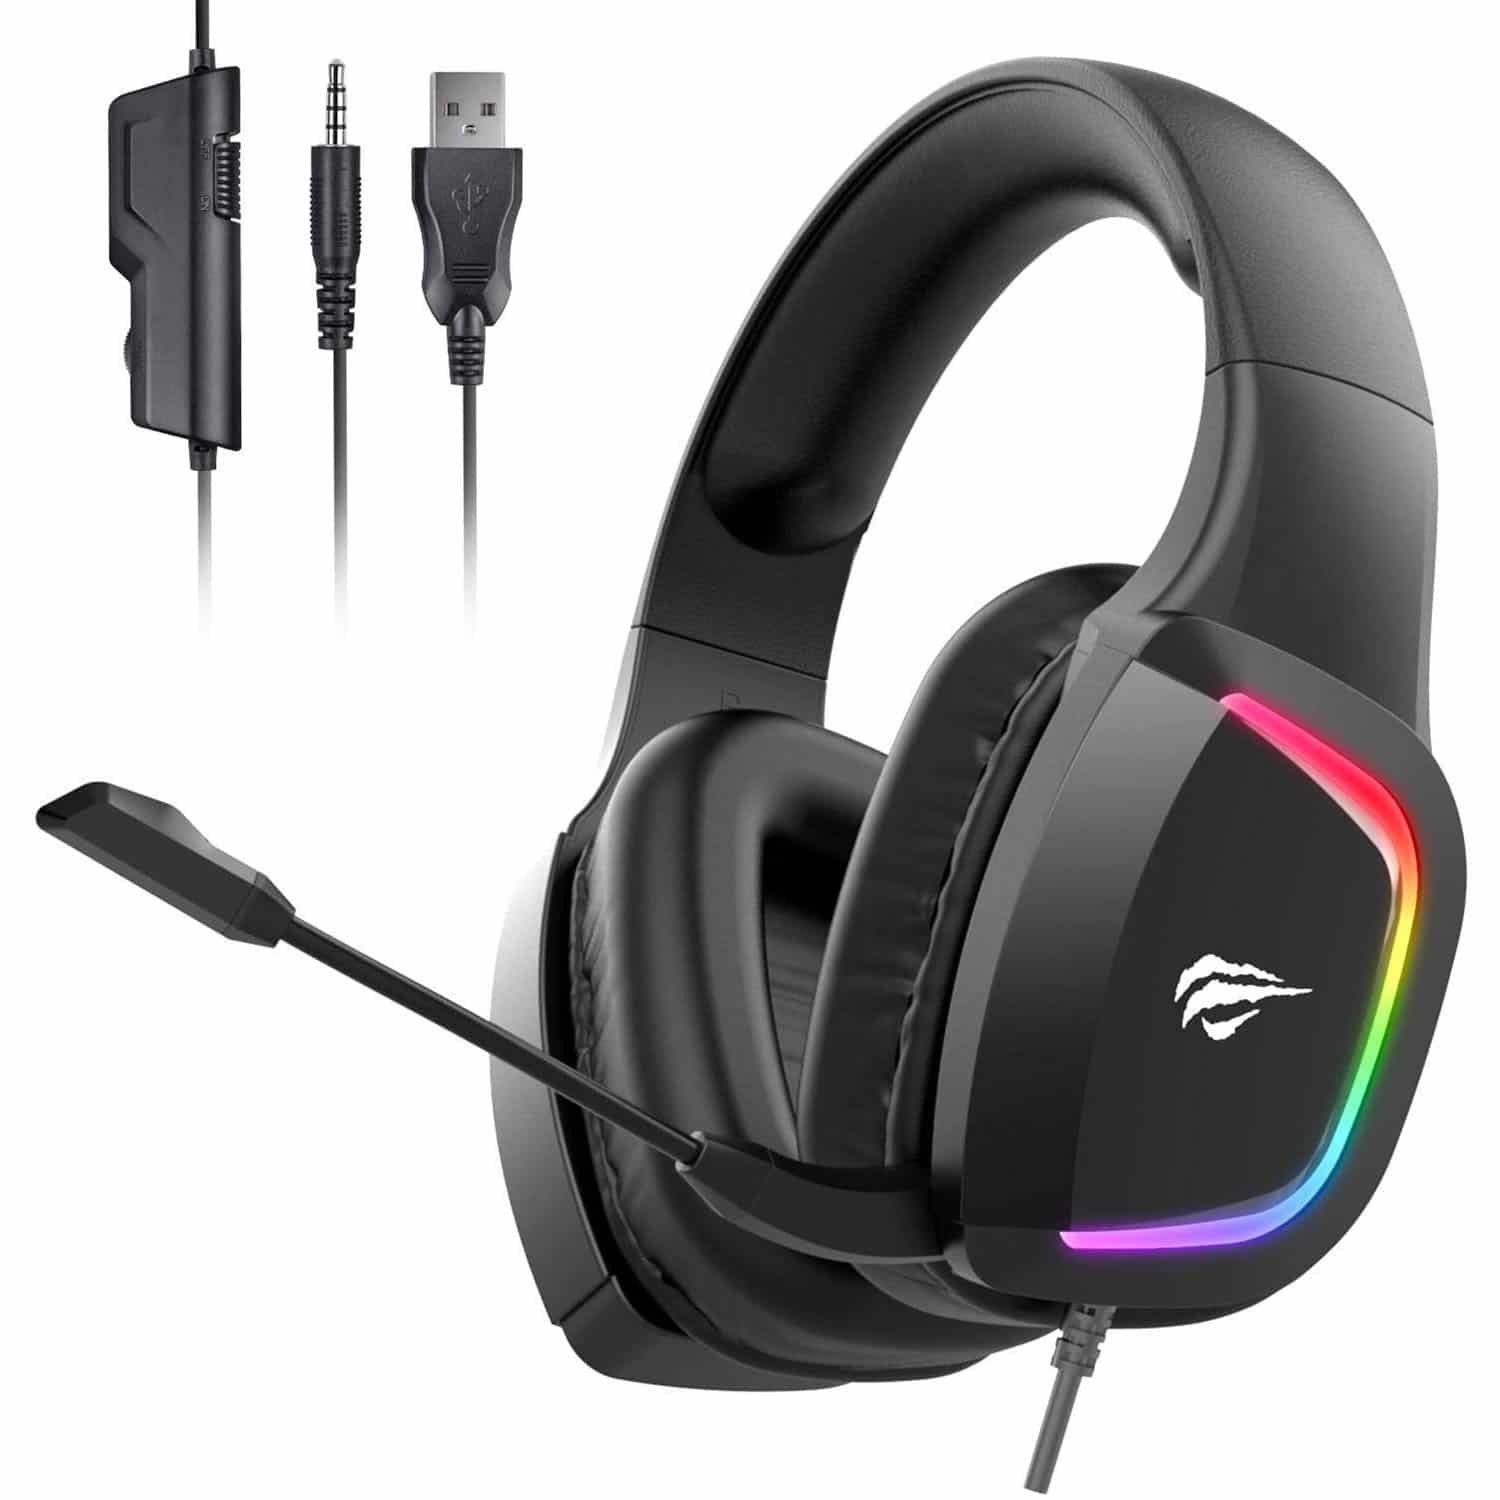 HAVIT H2025D RGB Wired Gaming Headset with 50mm Drivers & Volume Control